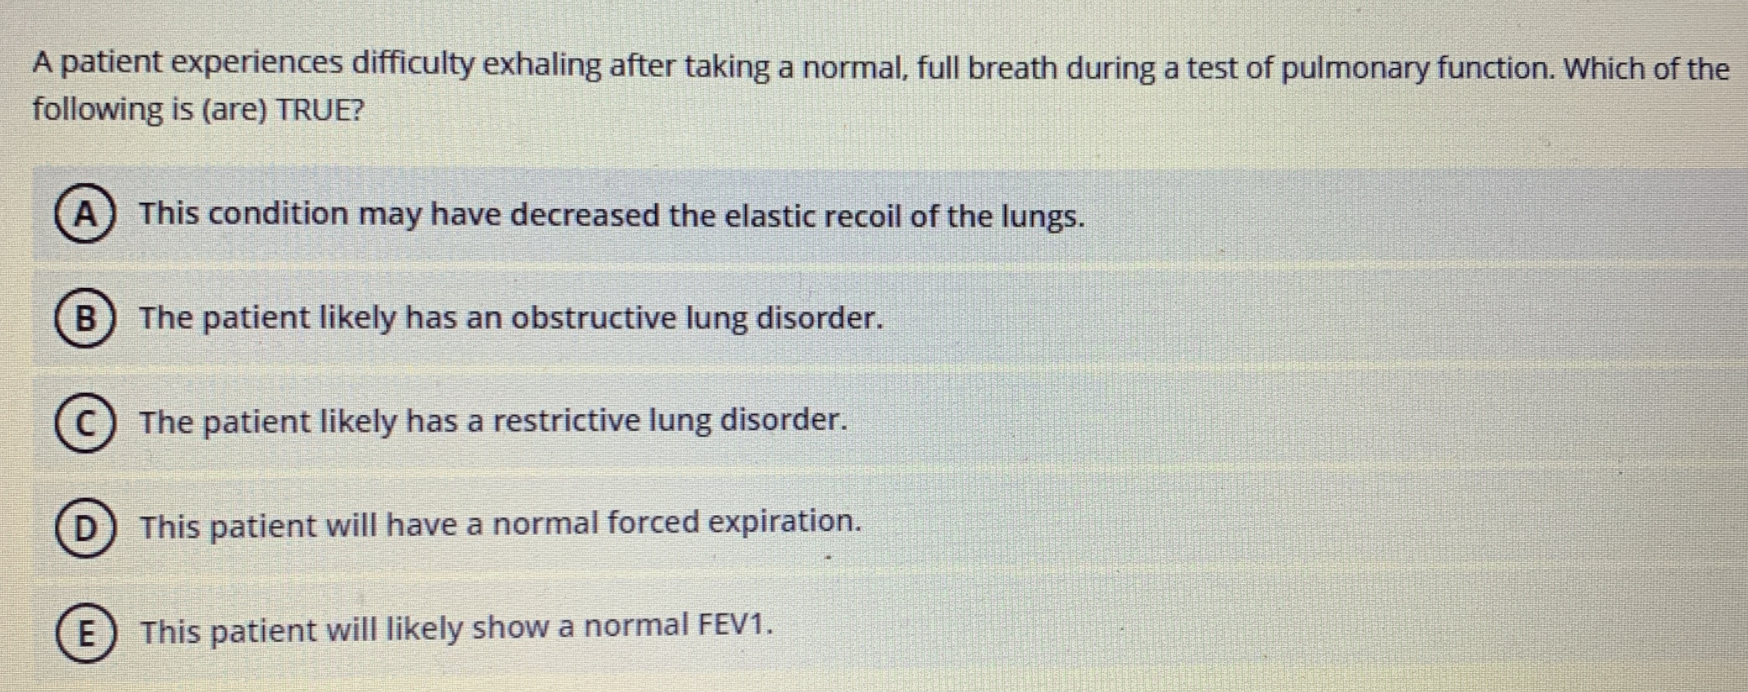 A patient experiences difficulty exhaling after taking a normal, full breath during a test of pulmonary function. Which of the
following is (are) TRUE?
A) This condition may have decreased the elastic recoil of the lungs.
B) The patient likely has an obstructive lung disorder.
The patient likely has a restrictive lung disorder.
This patient will have a normal forced expiration.
E
This patient will likely show a normal FEV1.
